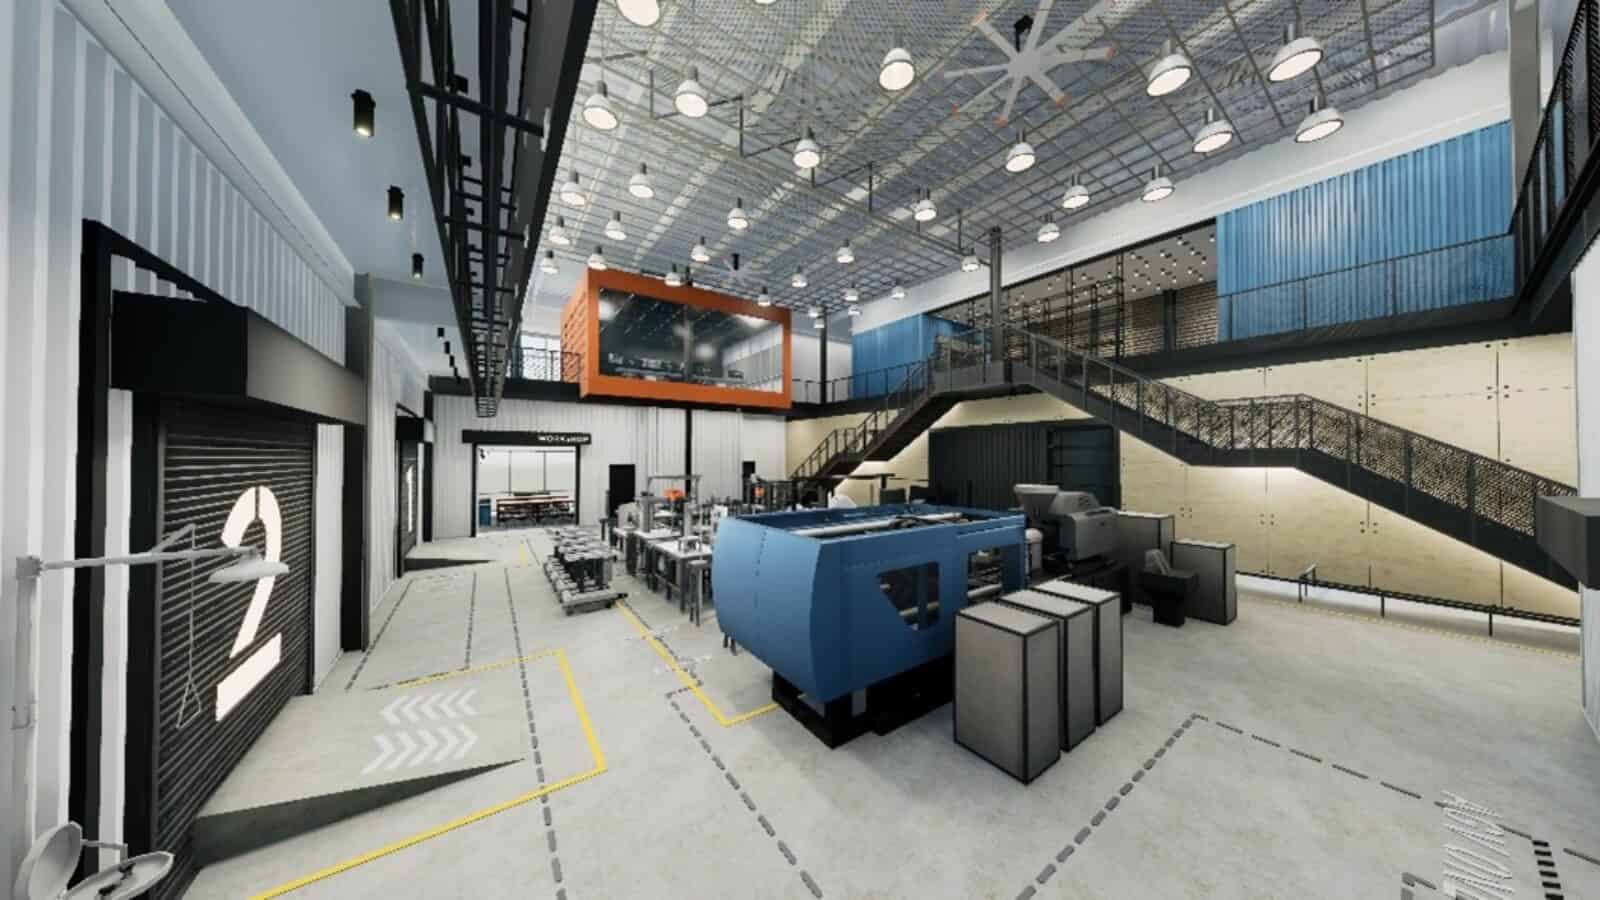 Rendering of the Smart Factory @ Wichita production line.